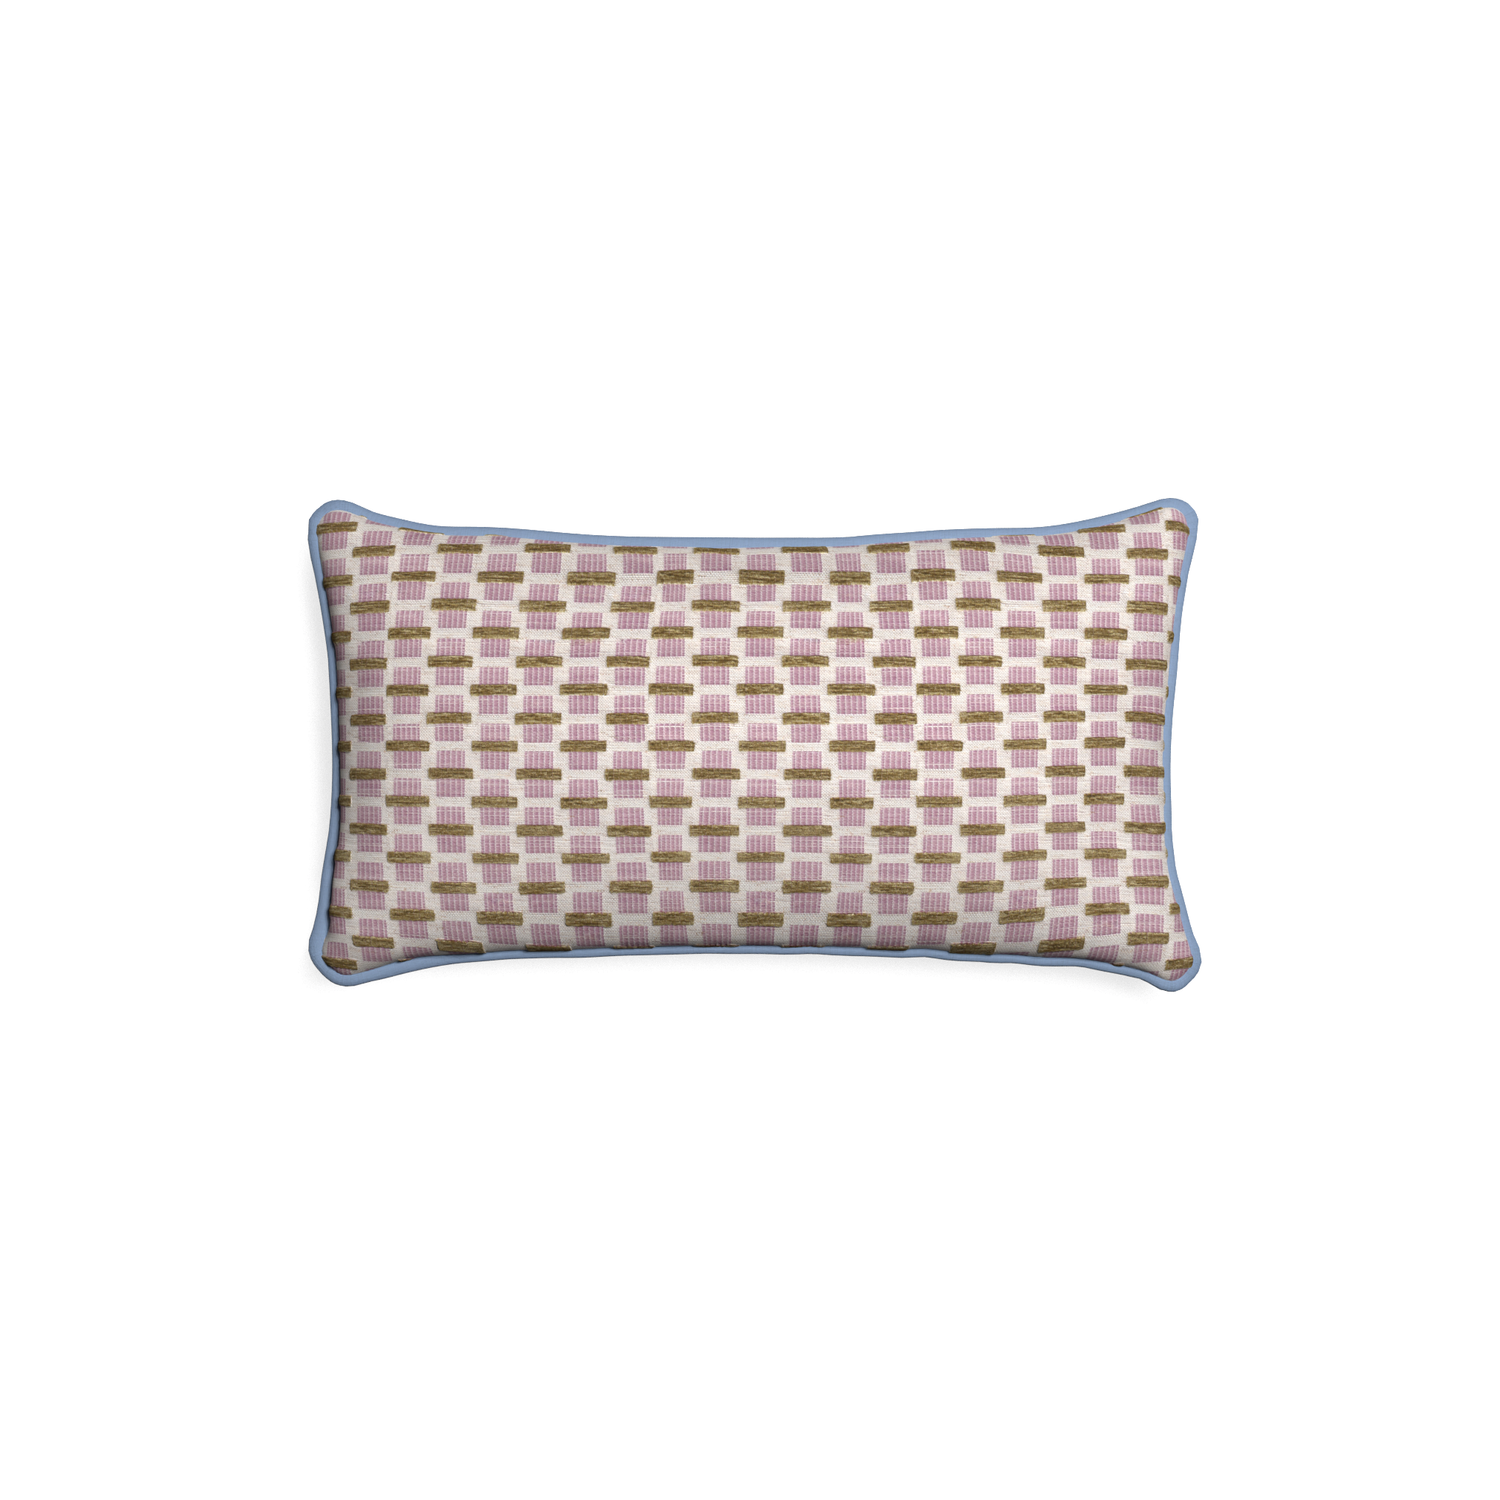 Petite-lumbar willow orchid custom pink geometric chenillepillow with sky piping on white background